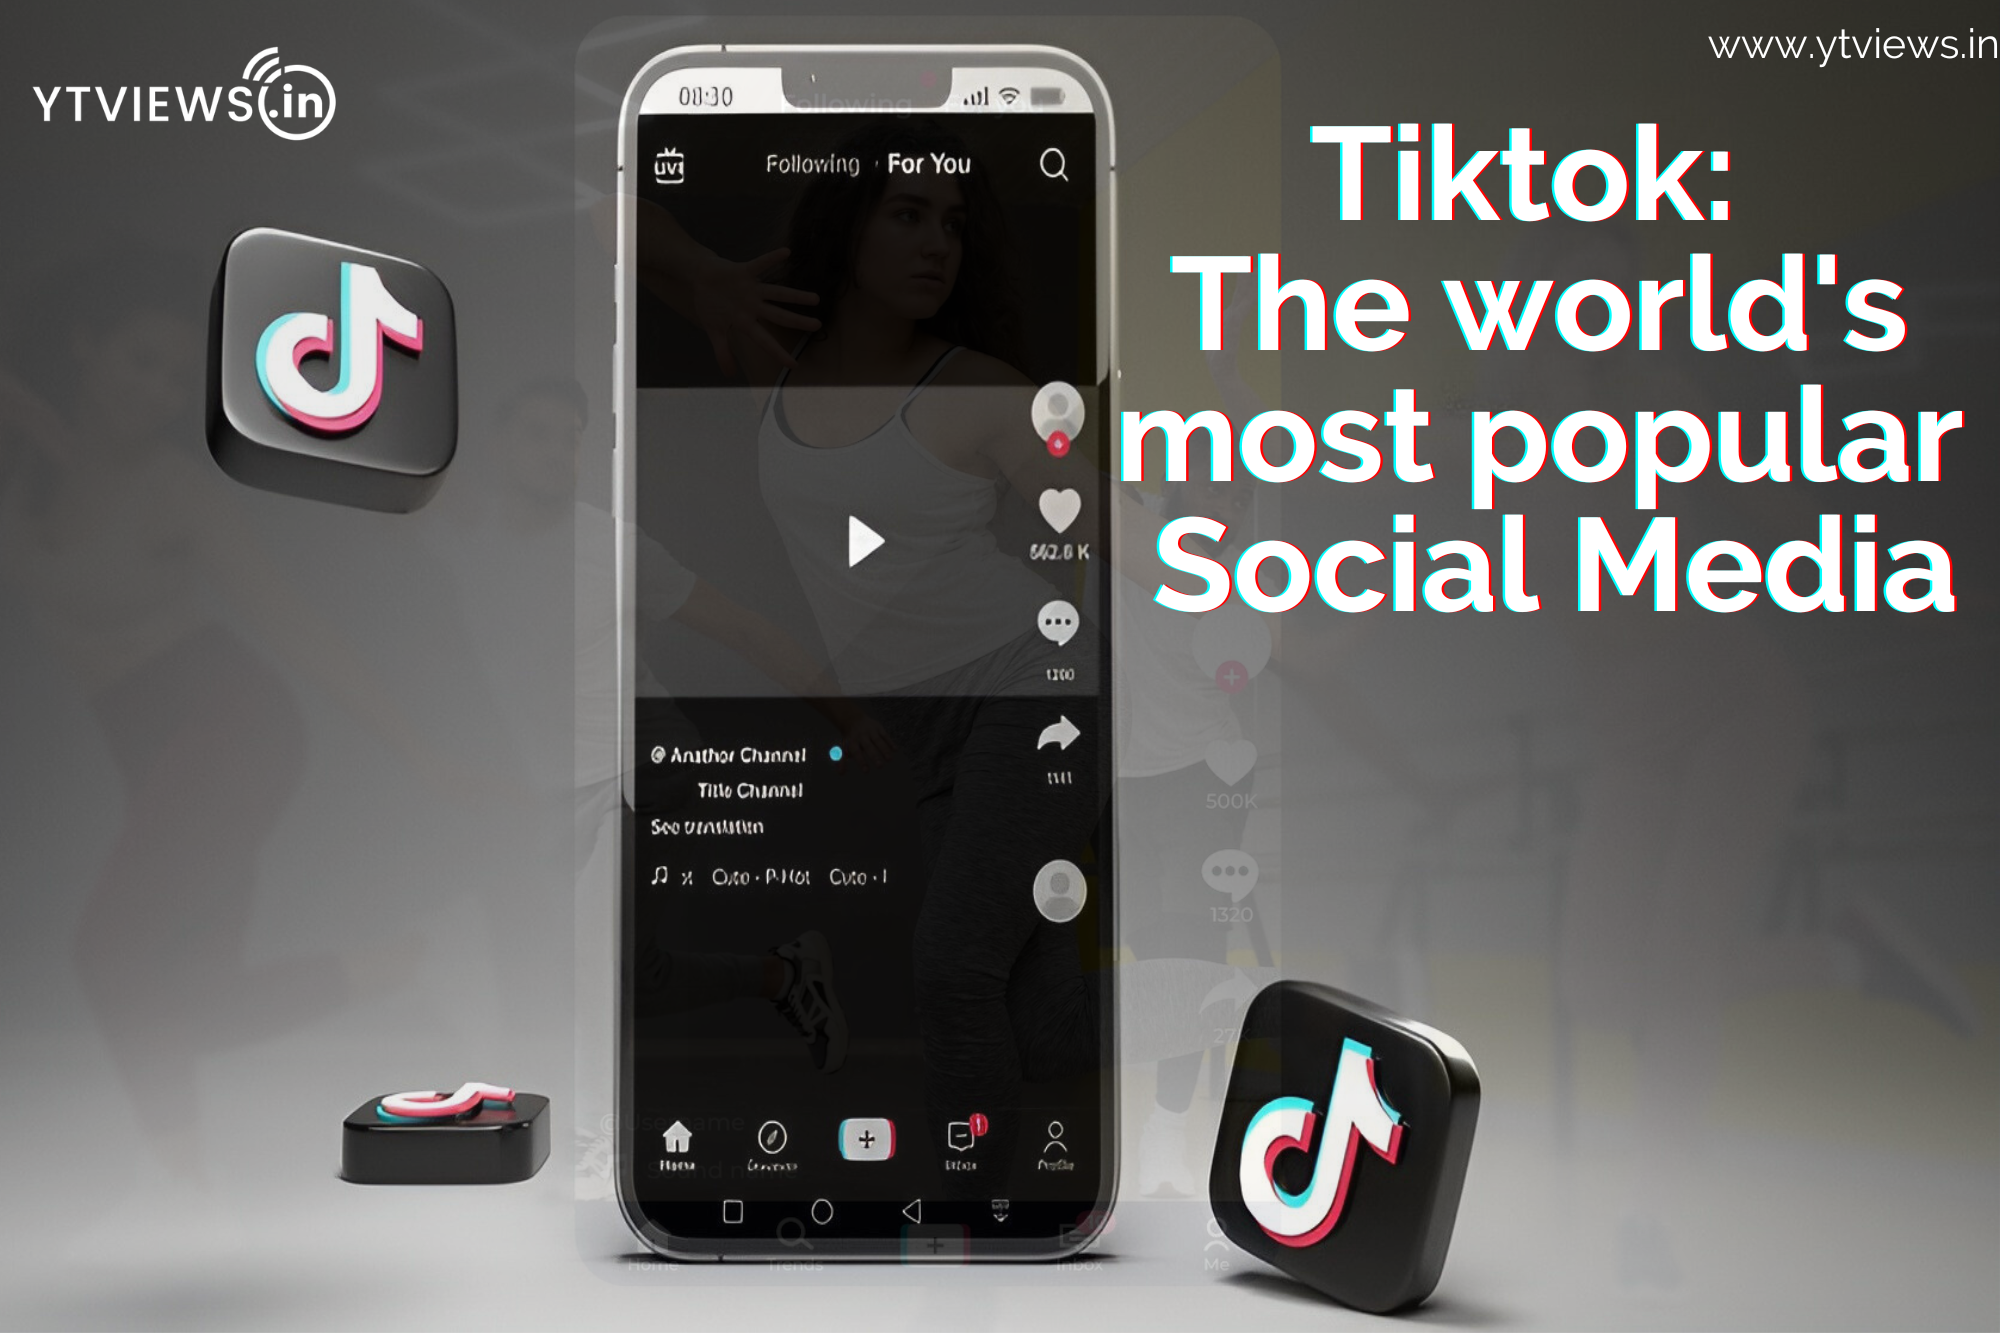 TikTok has emerged to become the world’s most popular social media